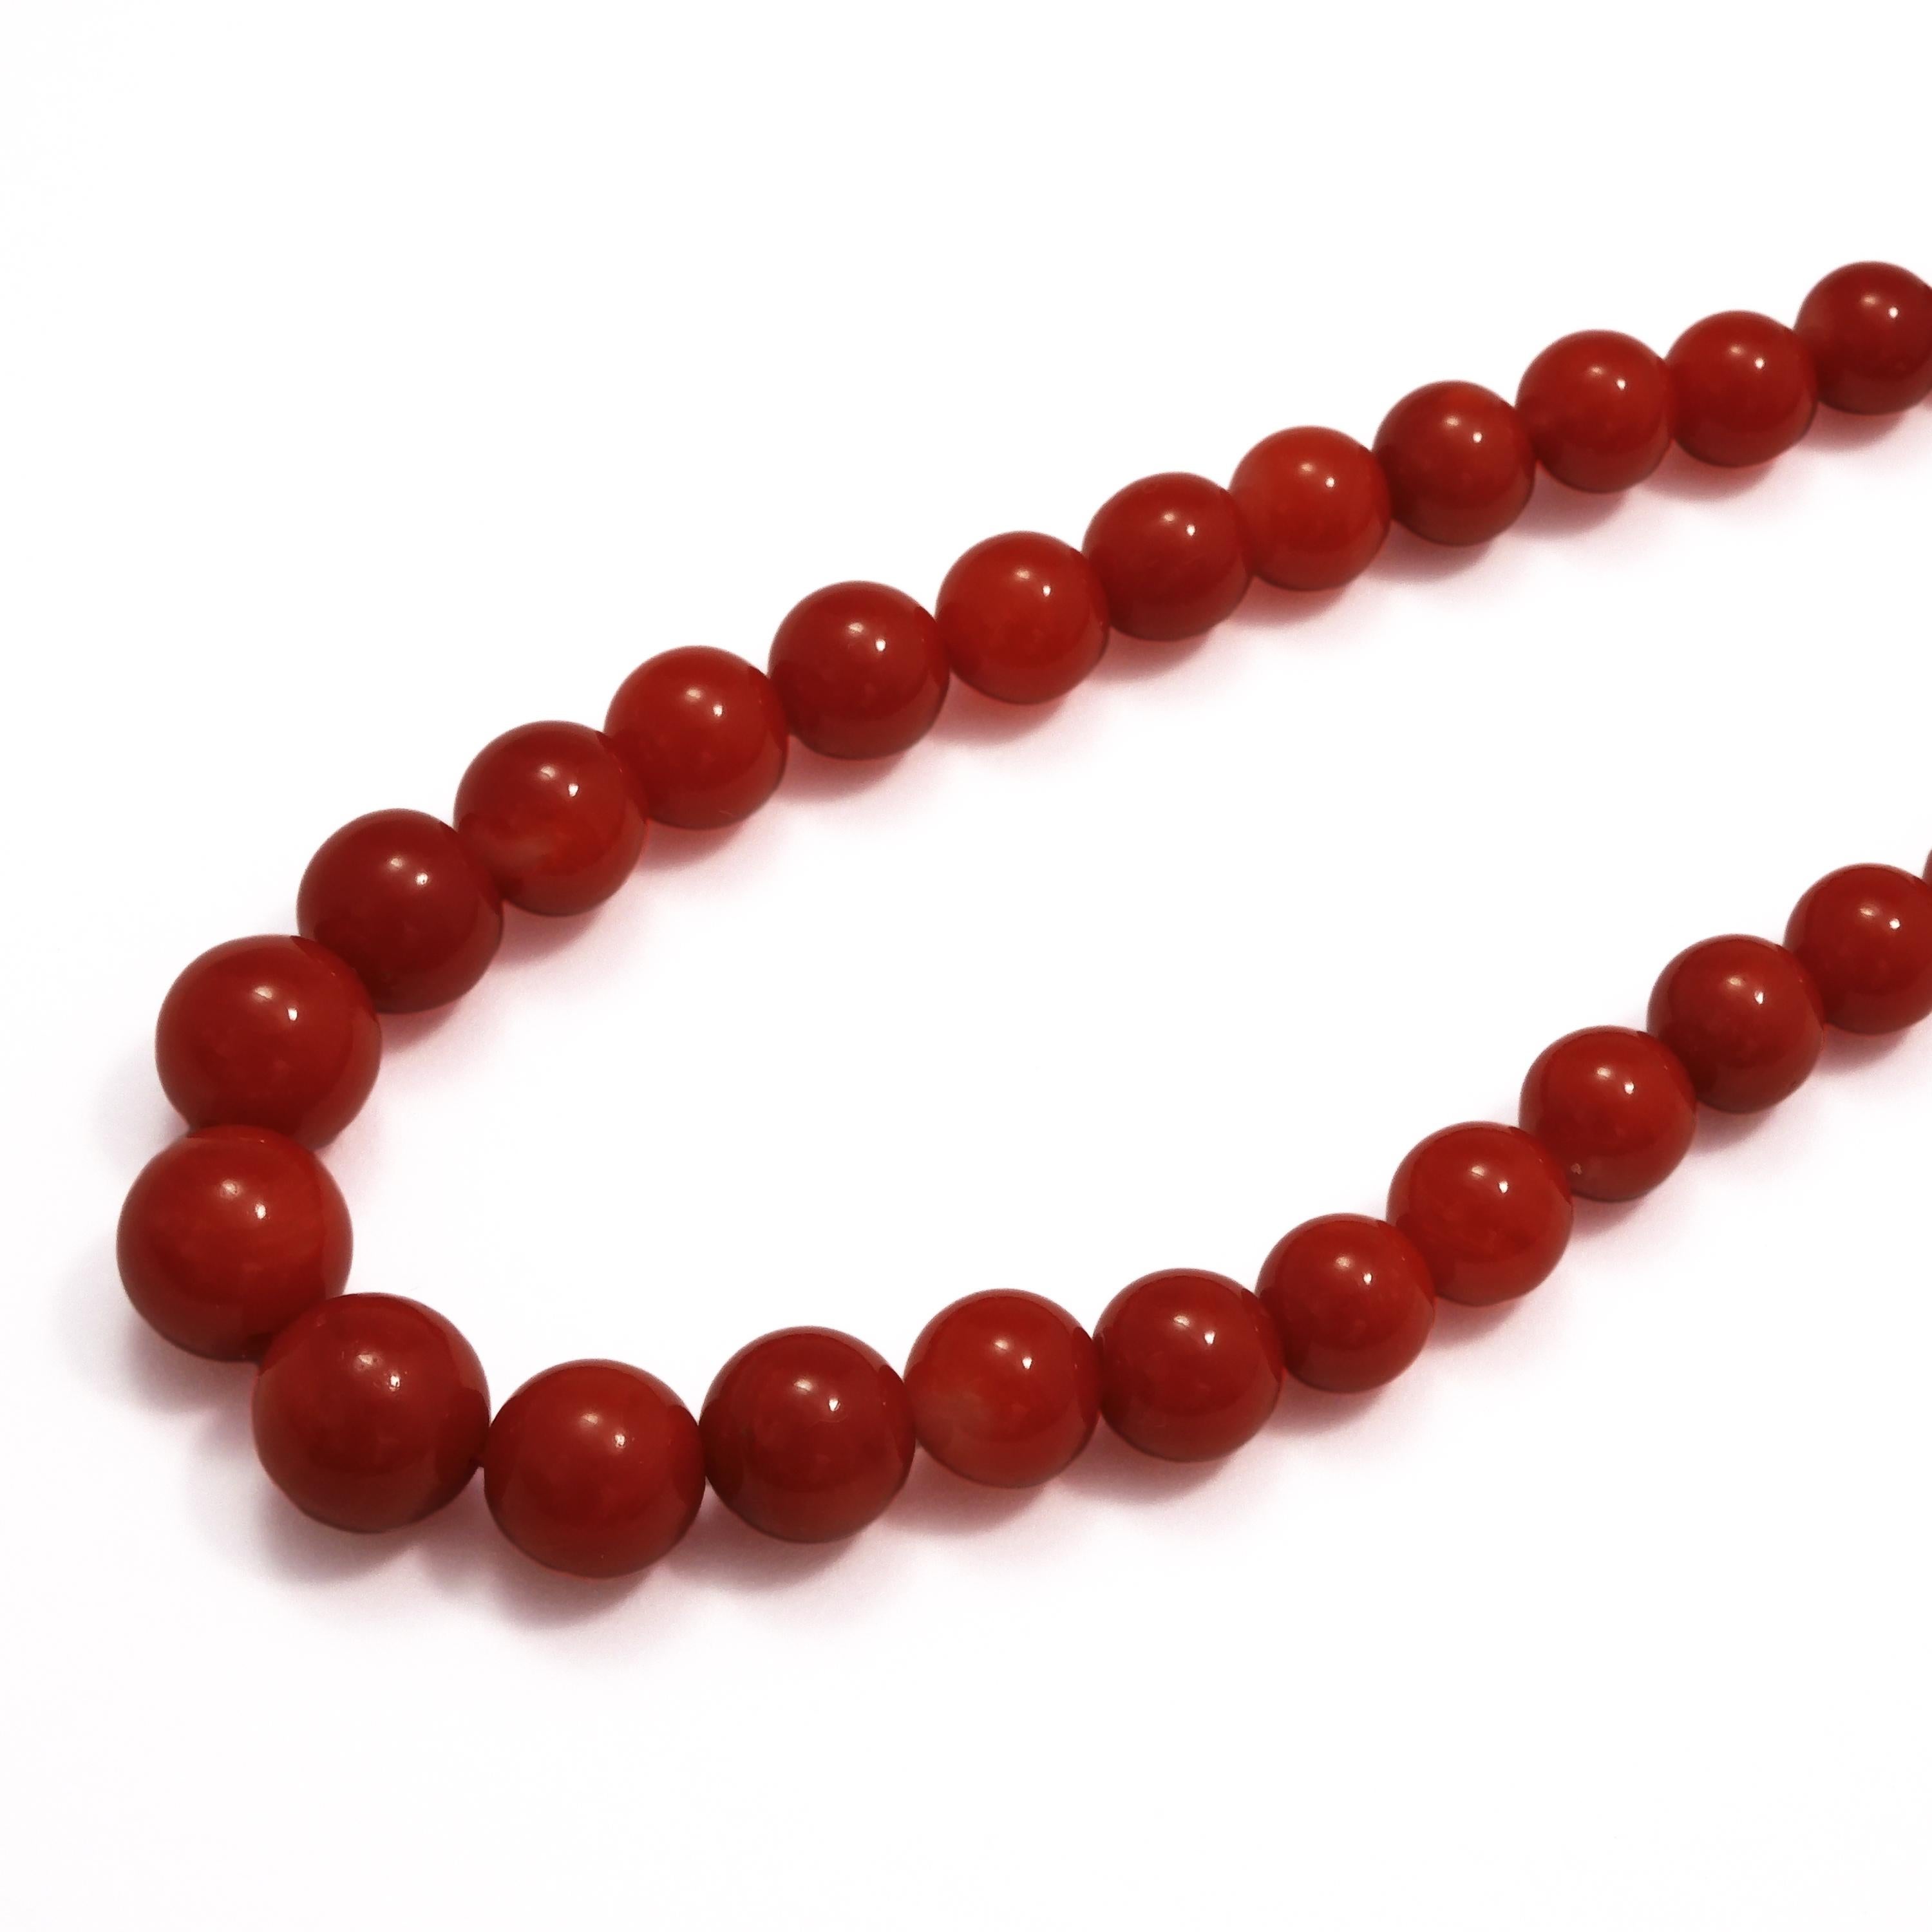 Japanese Chiaka Sango (Oxblood Coral) has a white core, so when you make beads for these kinds of necklaces, a white spot will inevitably appear somewhere.
For this necklace, the white spot has been removed piece by piece and carefully polished to